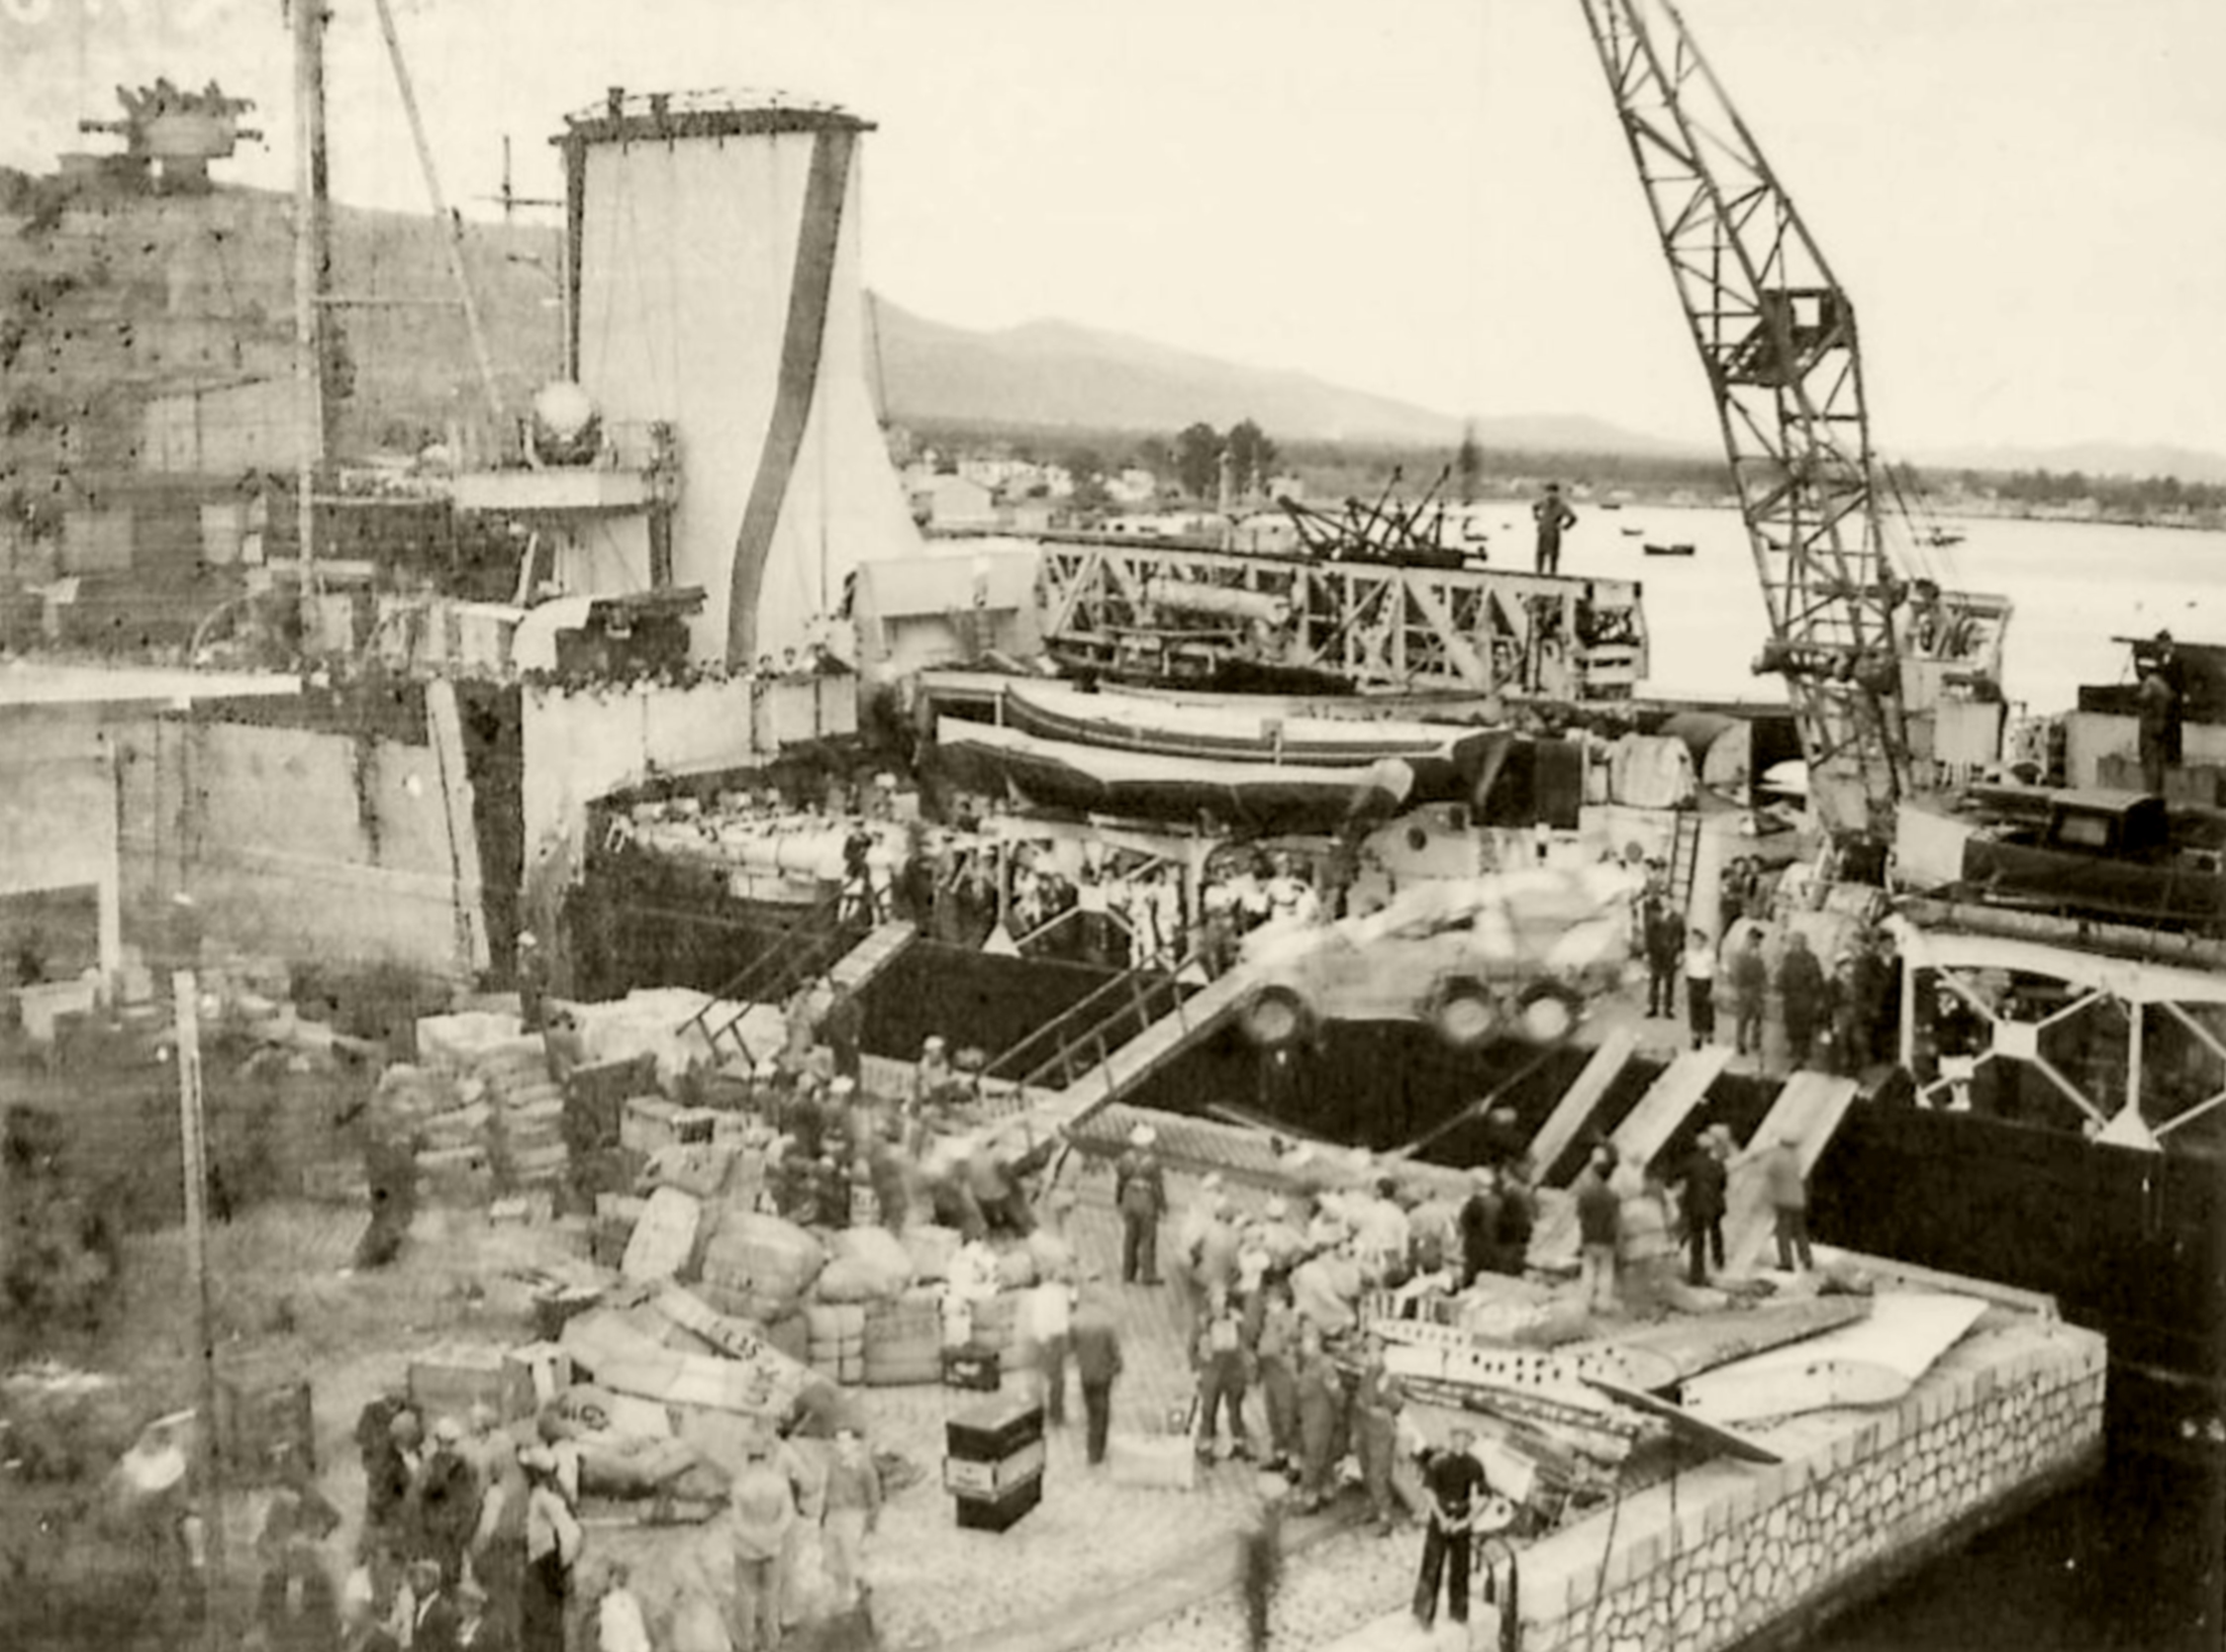 Reinforcing Crete scene on the quayside as the warship was disembarking men and material IWM E1159